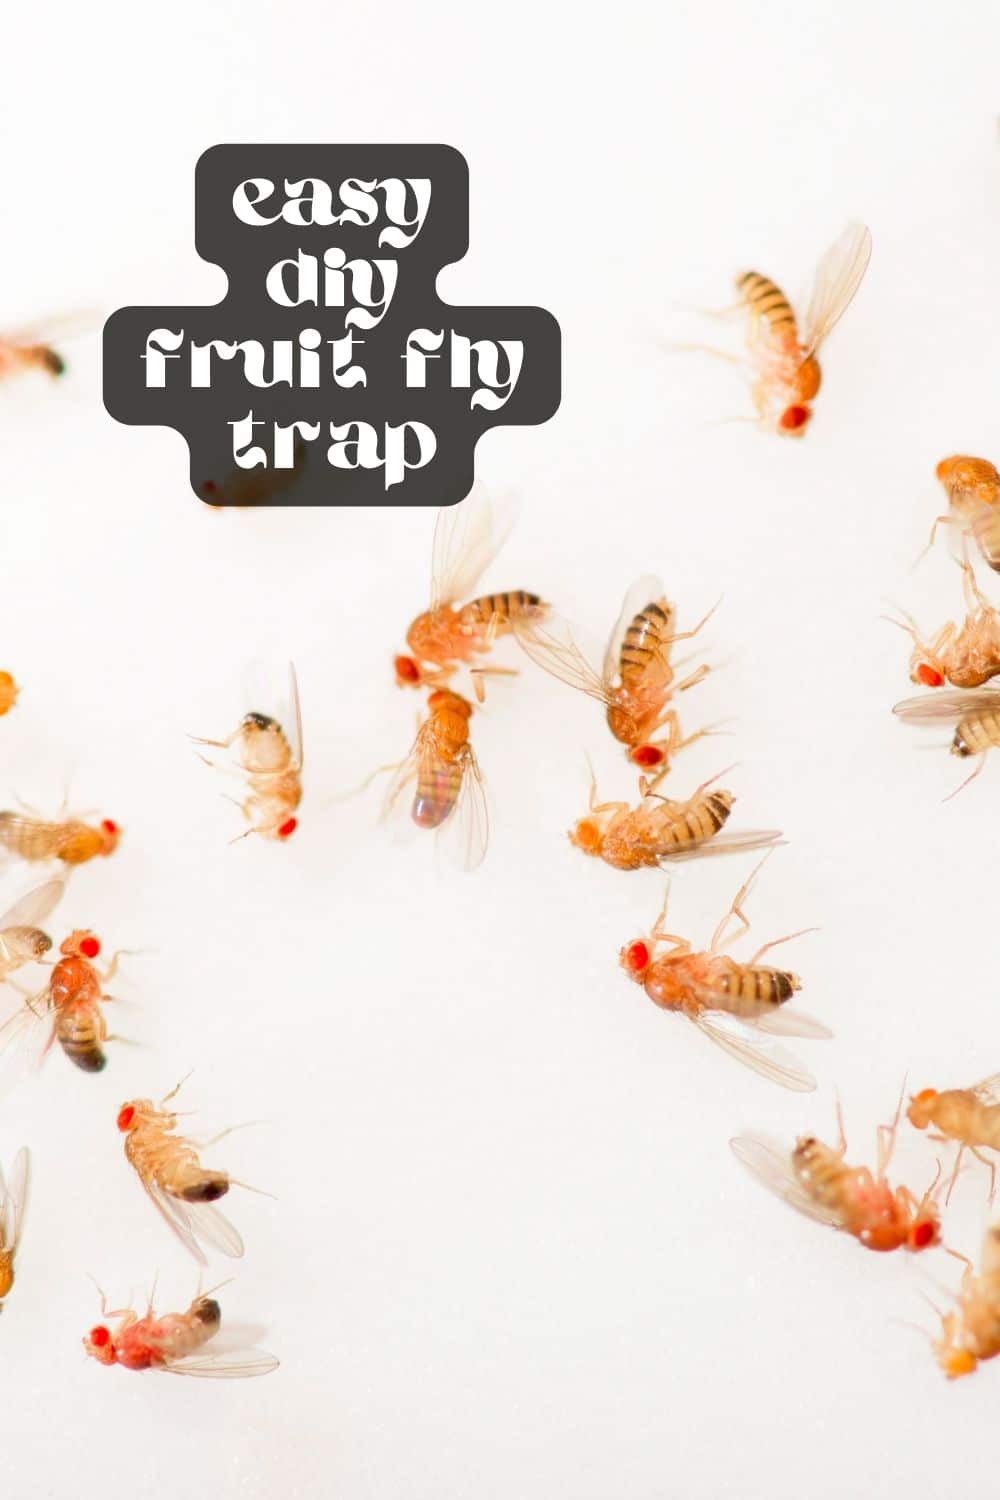 No one wants fruit flies buzzing around their kitchen! Follow my step-by-step guide and learn how to trap fruit flies using 3 basic household items. These fruit fly traps are super easy to make and are highly effective!